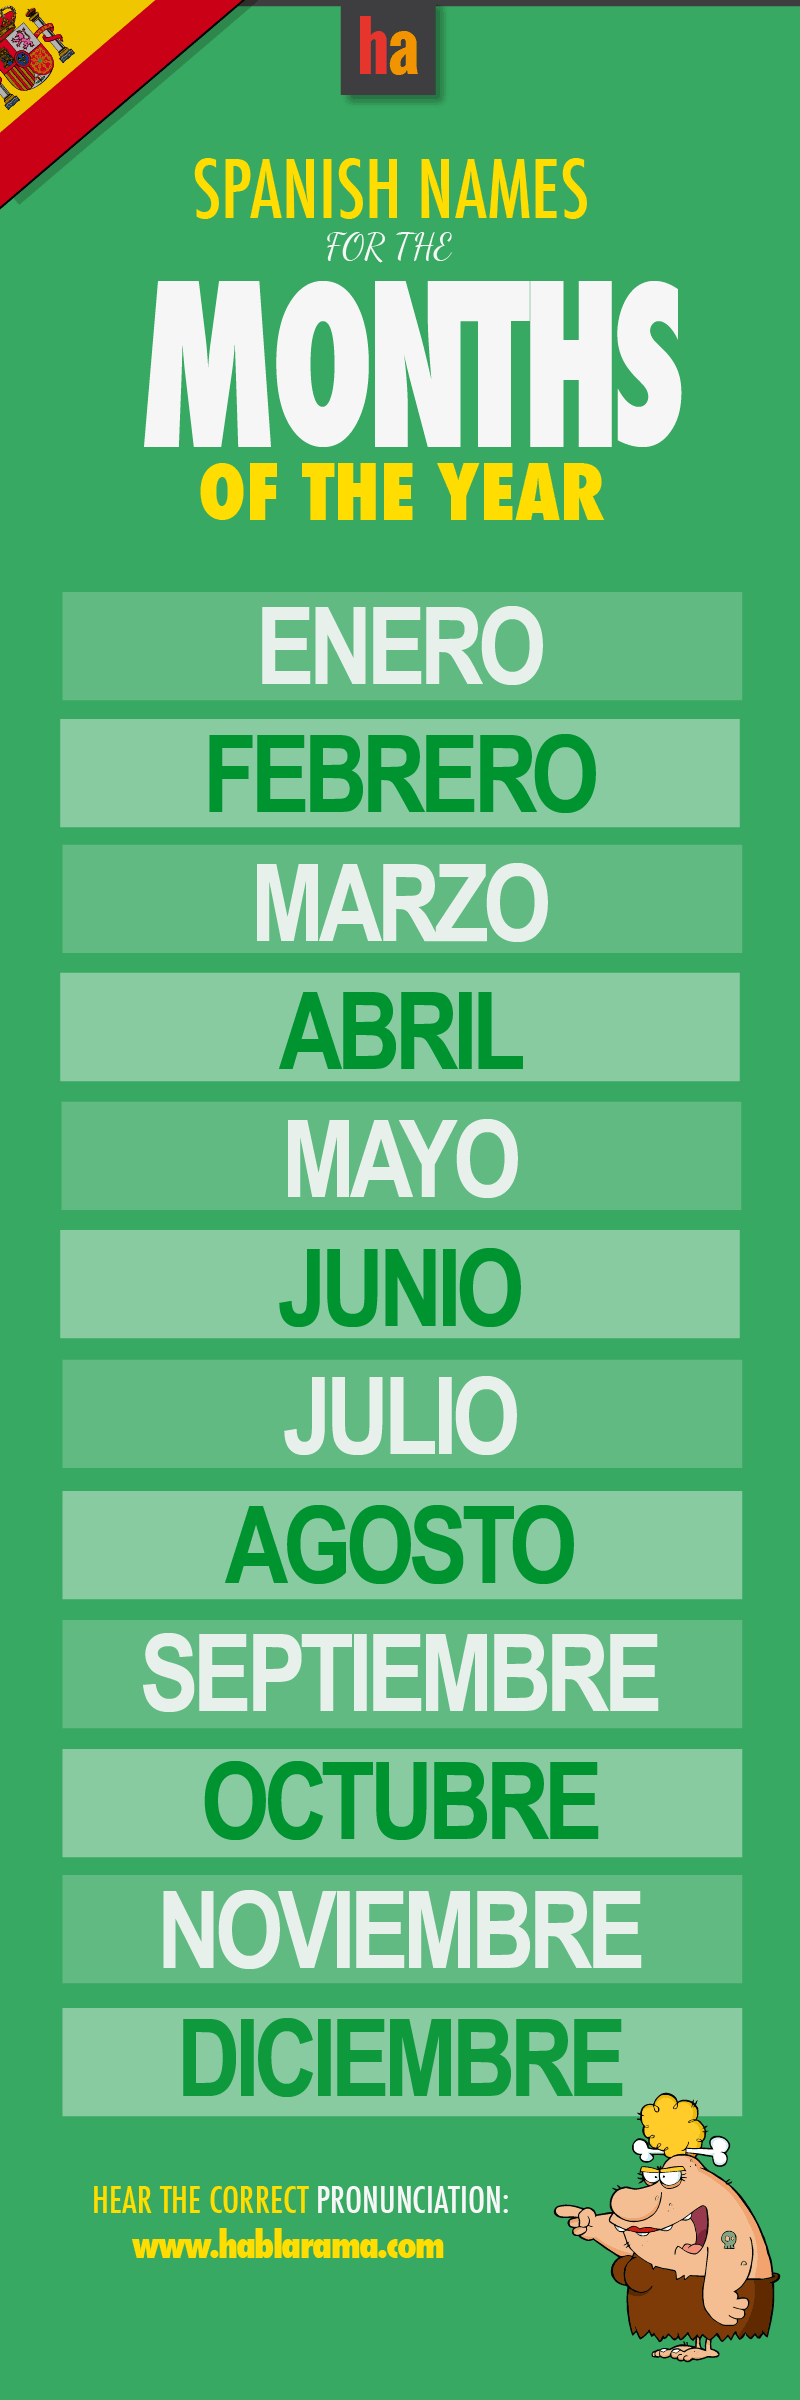 The Months Of The Year In Spanish